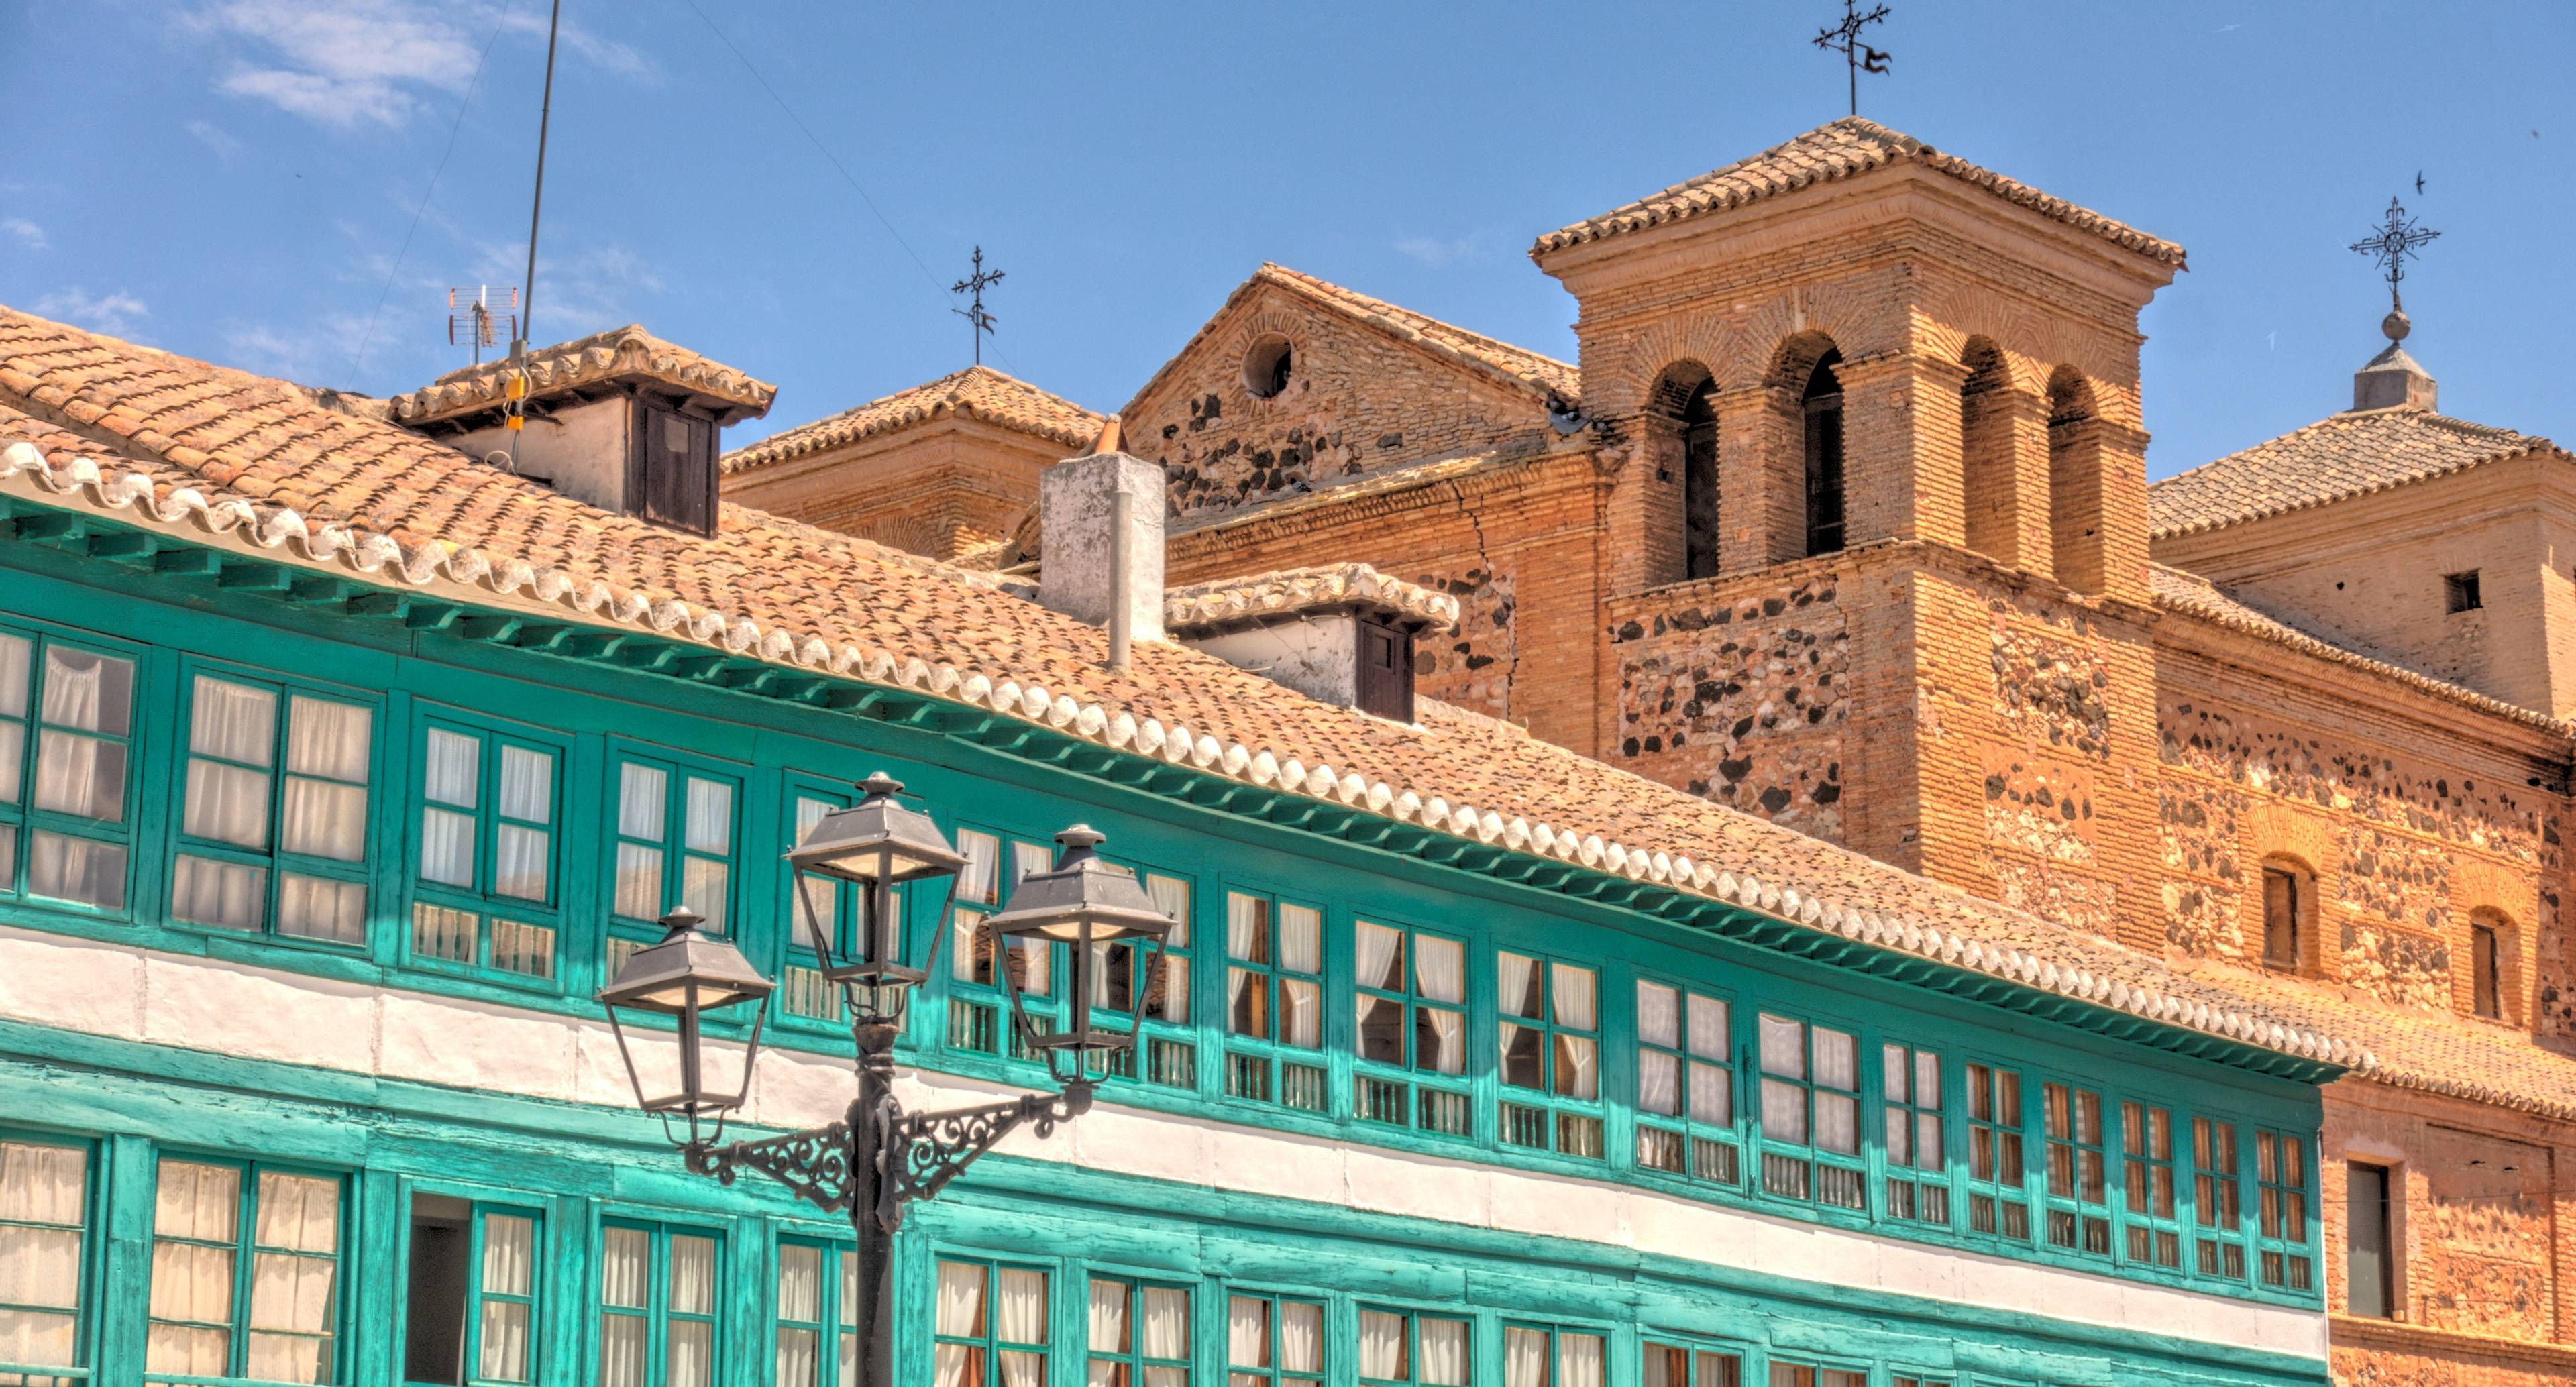 Chinchon and Aranjuez Traditional Towns